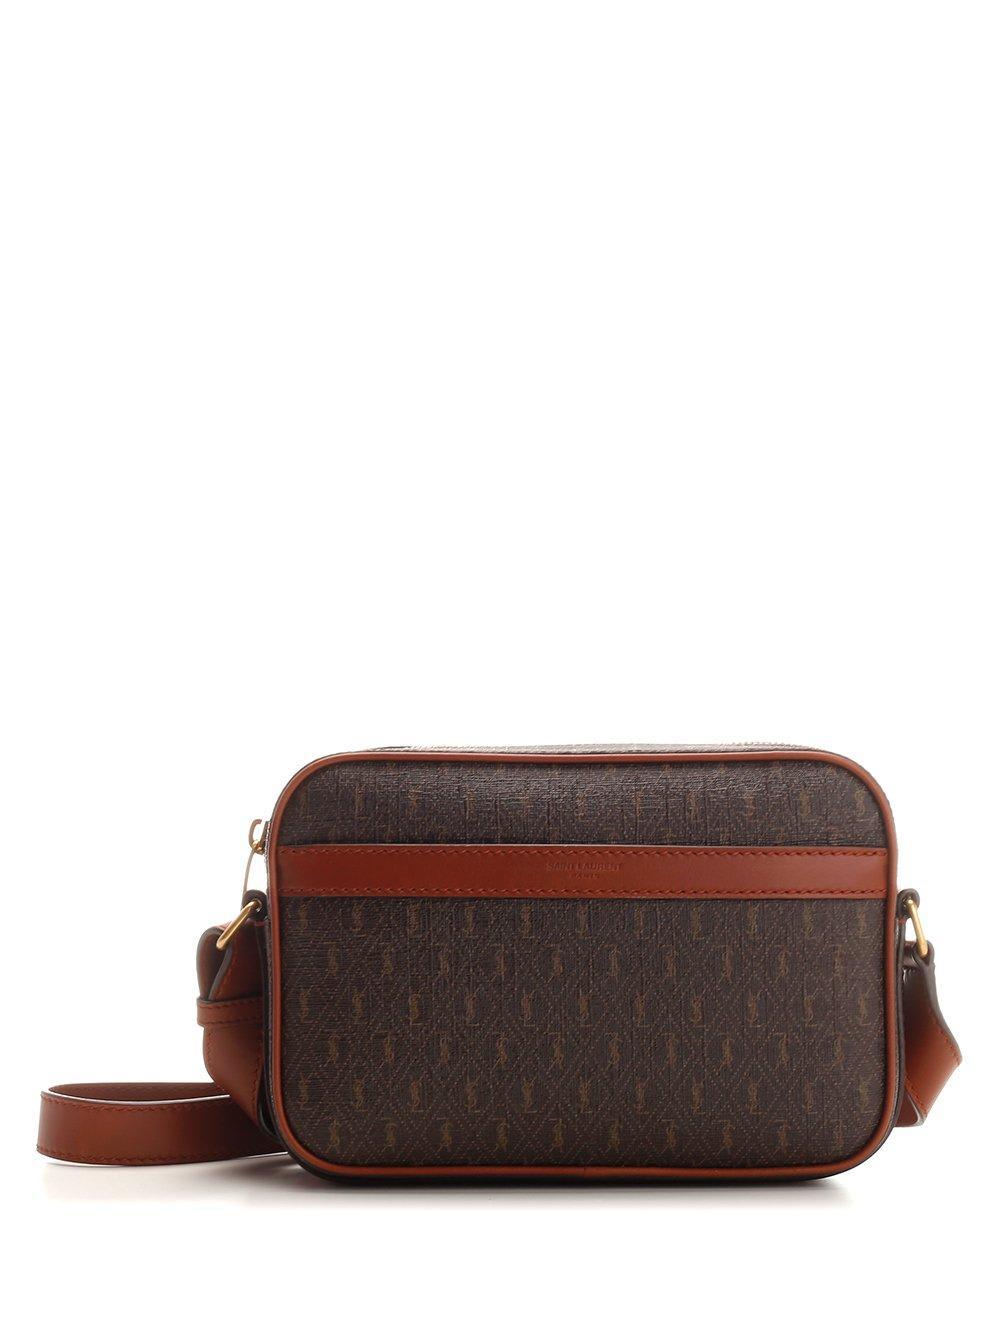 Saint Laurent Le Monogramme Camera Bag In Monogram Canvas And Smooth Leather  in Natural for Men